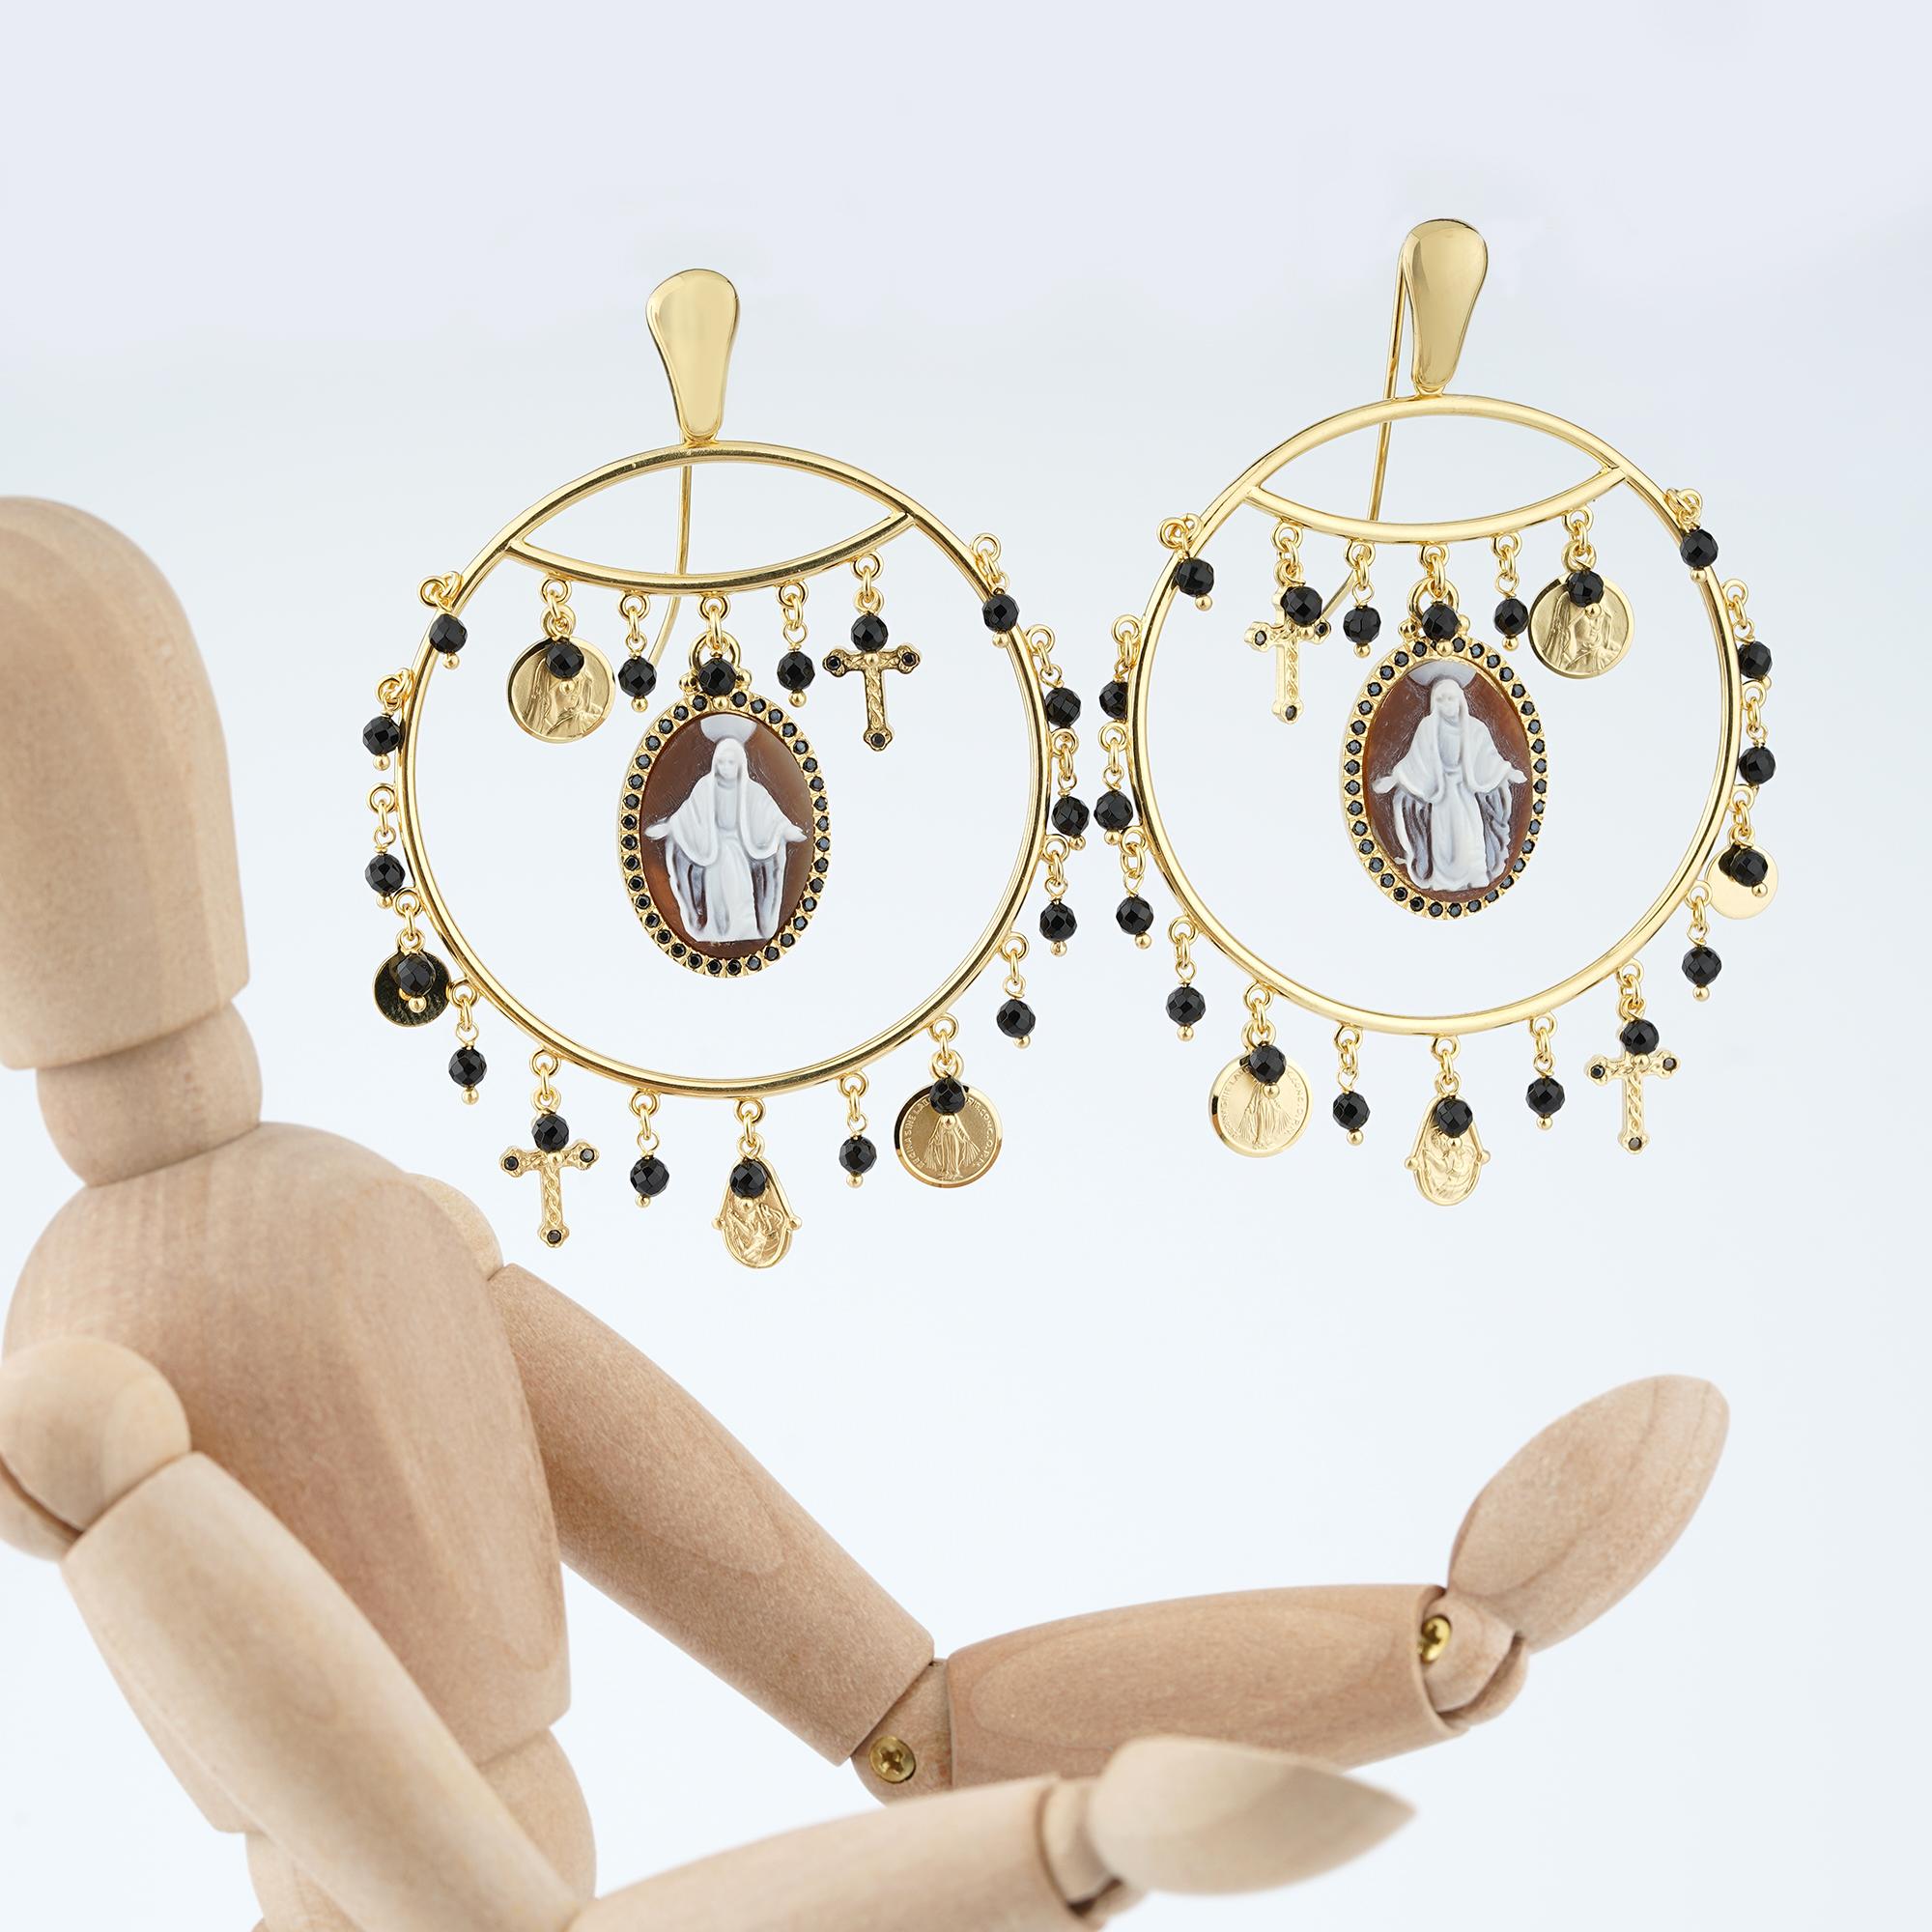 cameo necklace and earrings